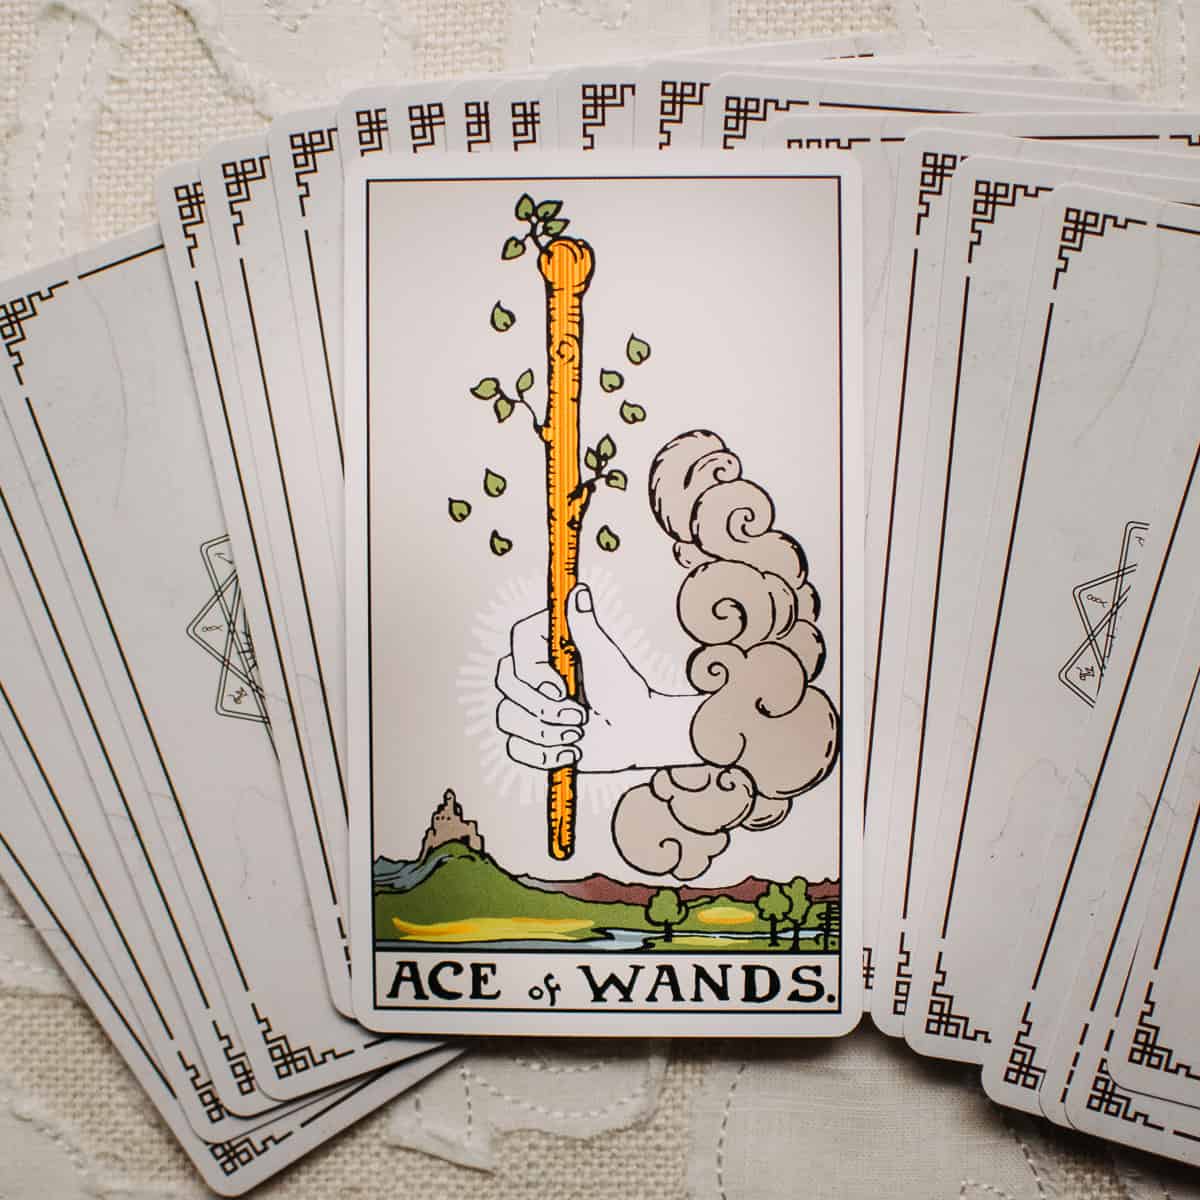 Hand emerging from a cloud holding a single wand as depicted on the Ace of Wands tarot card.